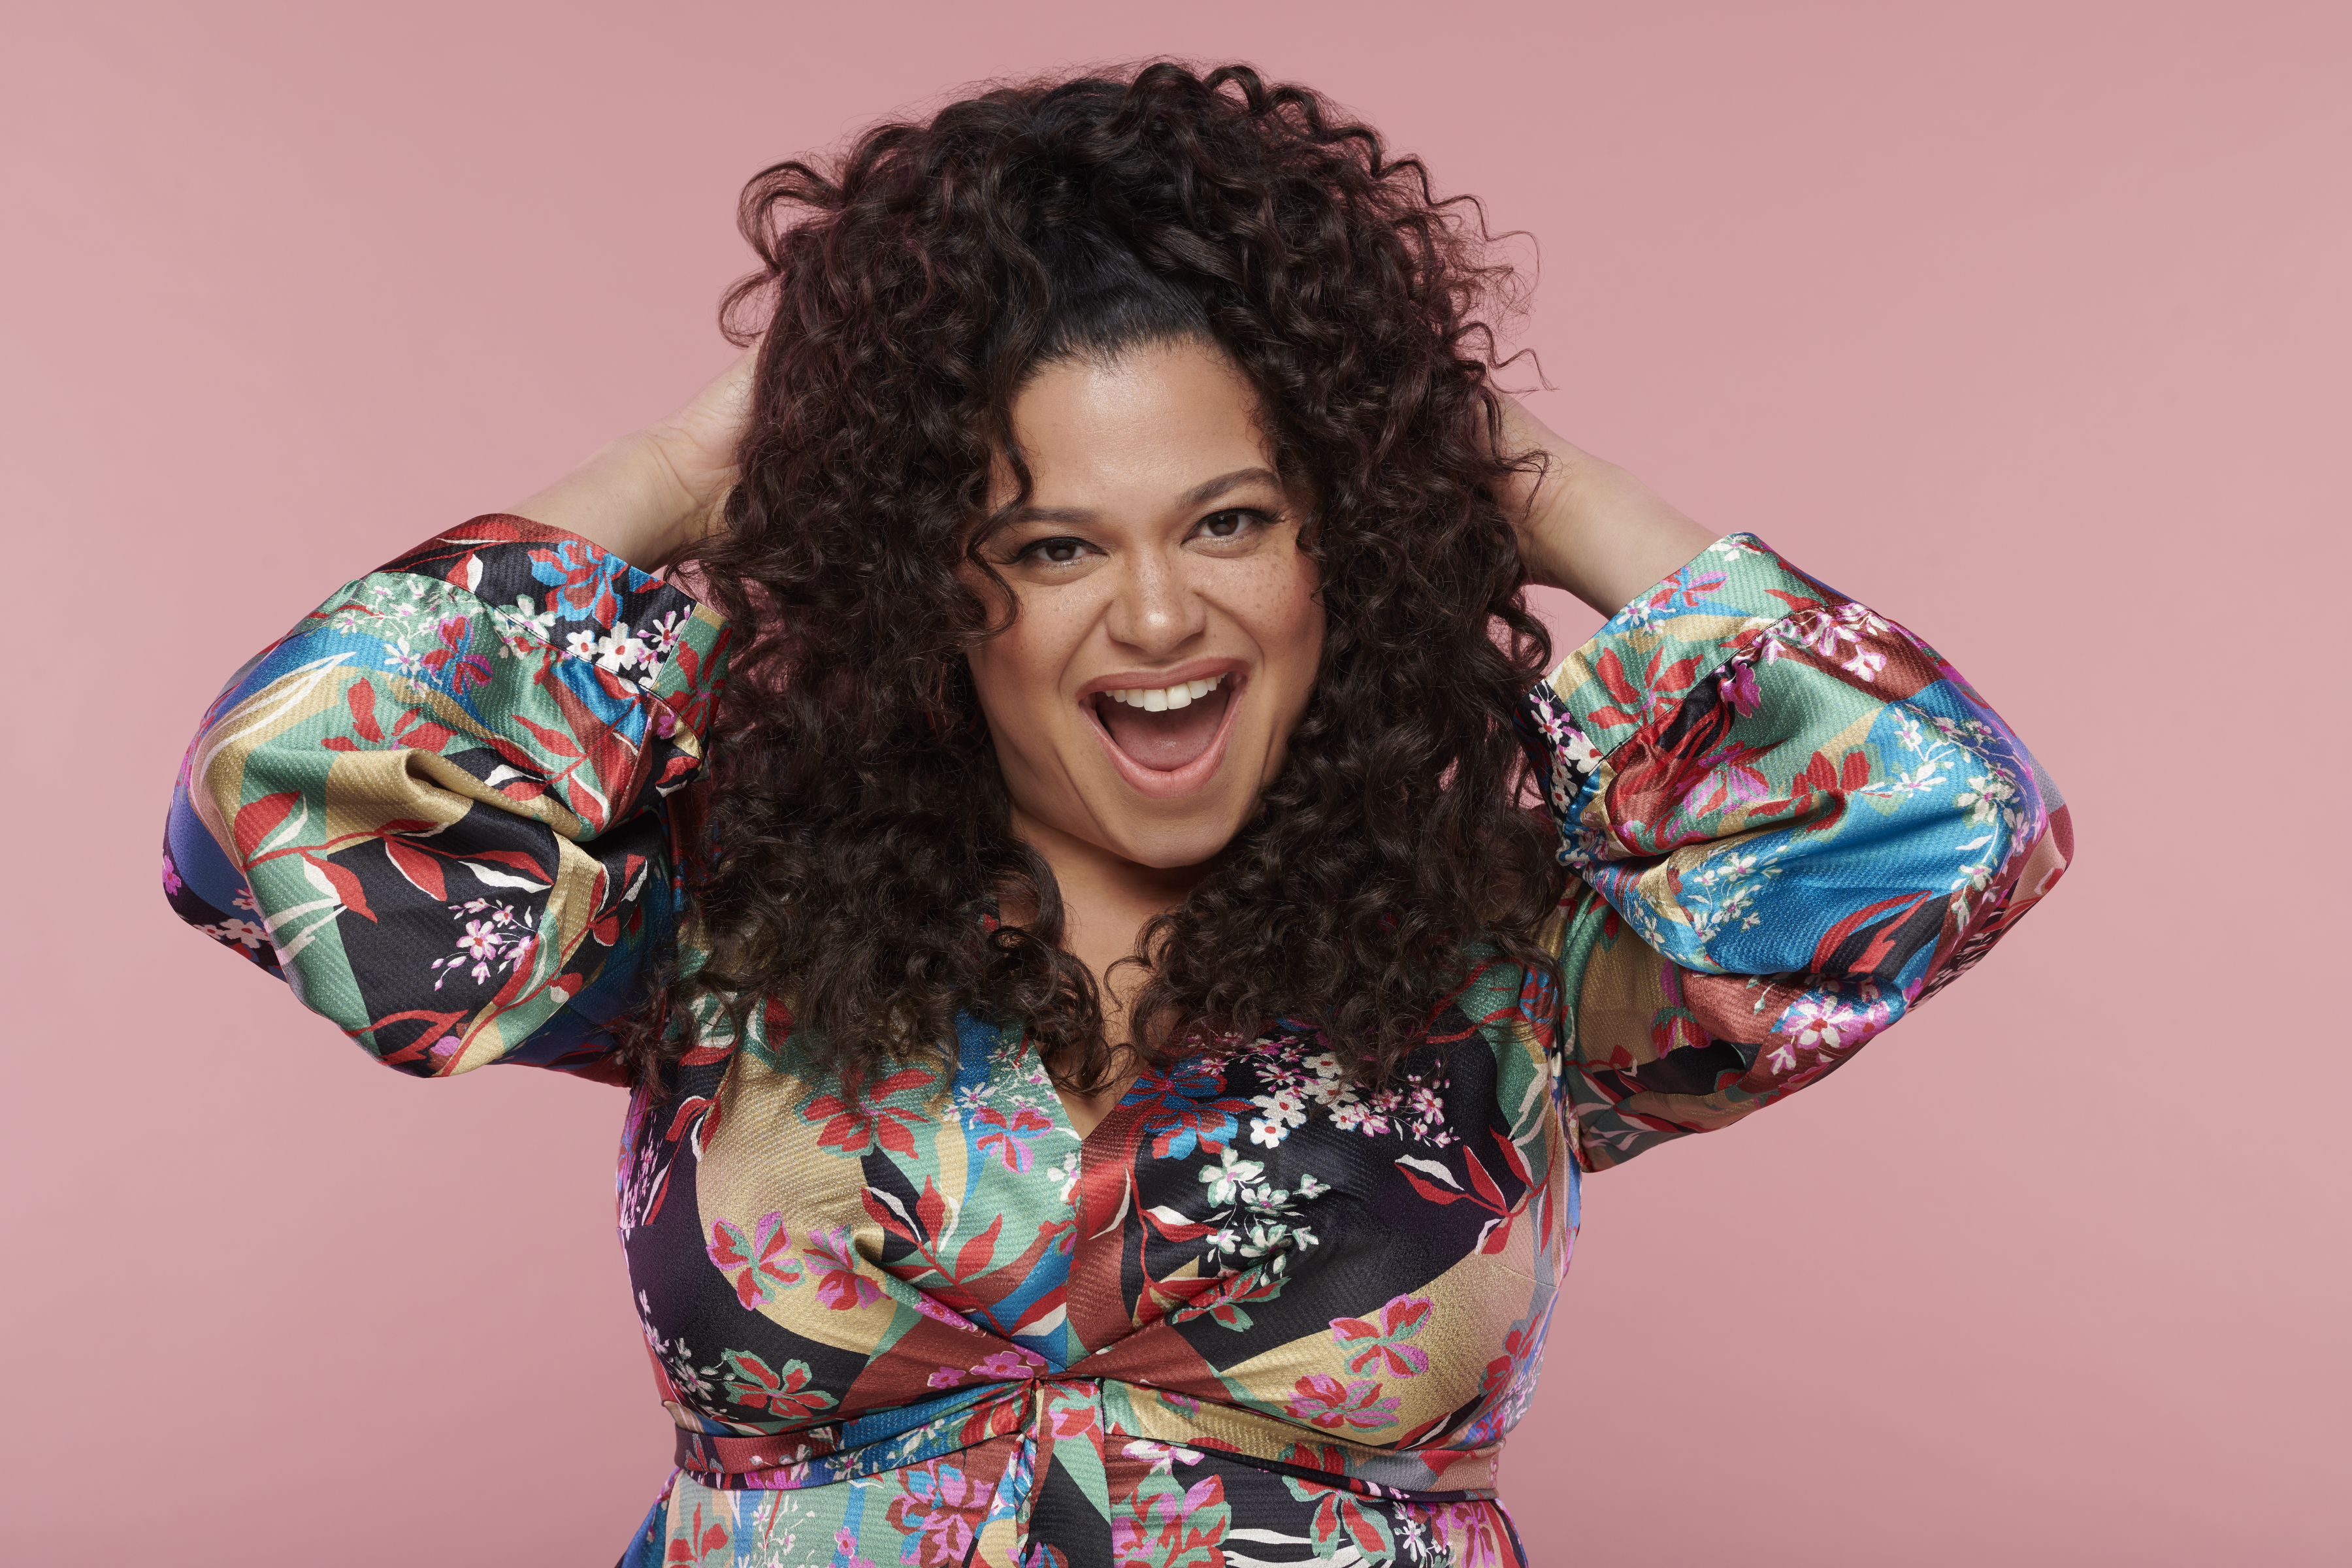 Here's the Teaser for Michelle Buteau's Comedy Series “Survival Of